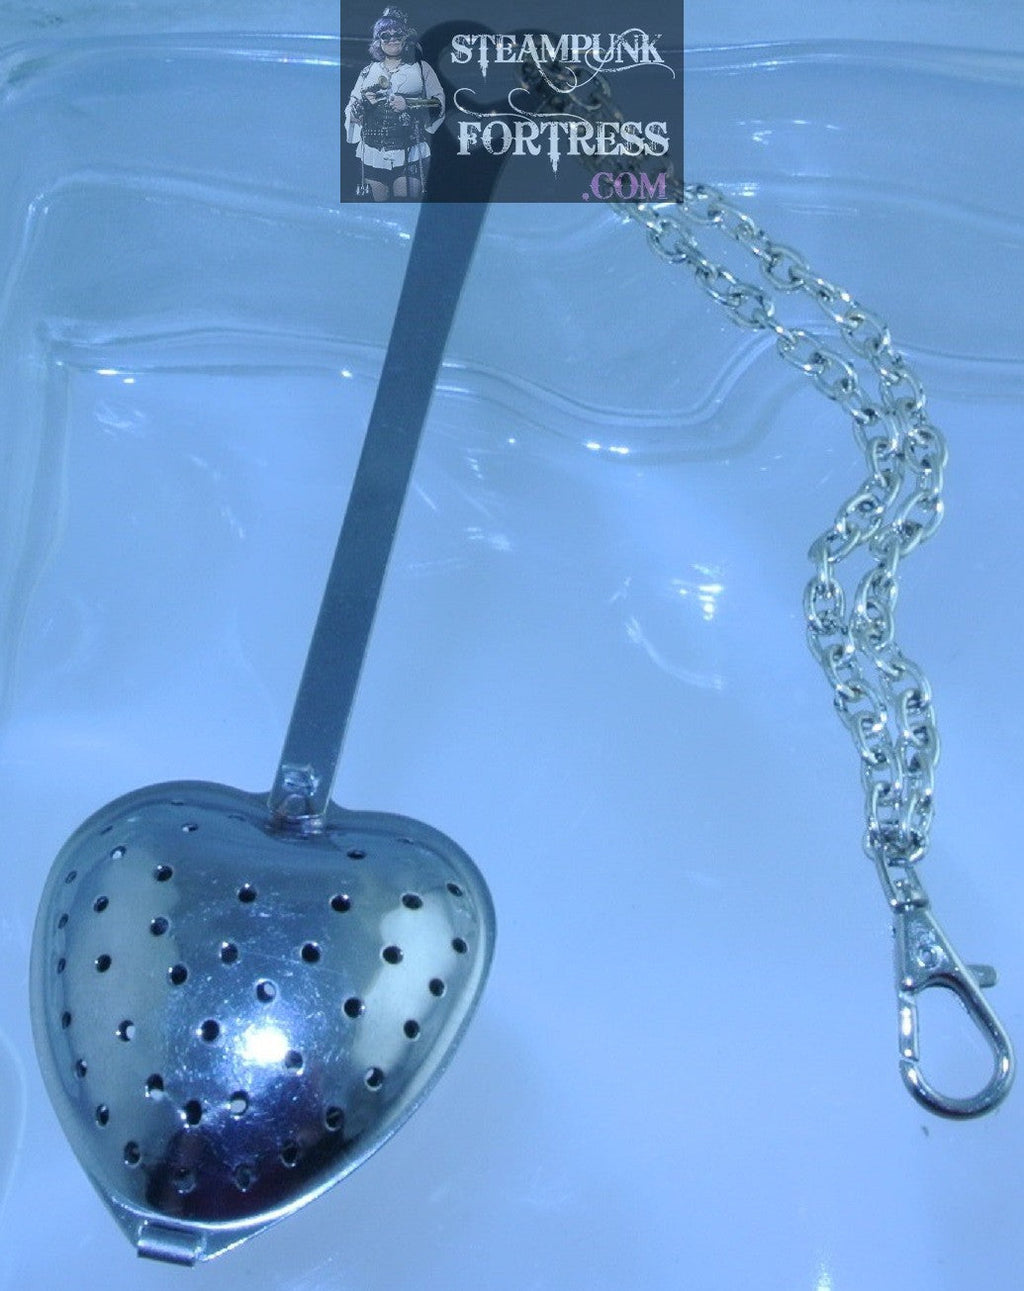 SILVER STRAINER SPOON STIRRER INFUSER HEART SHAPE TEA DUELING HEAVY CHAIN CLASP CLIP STARR WILDE STEAMPUNK FORTRESS DUPLICATE